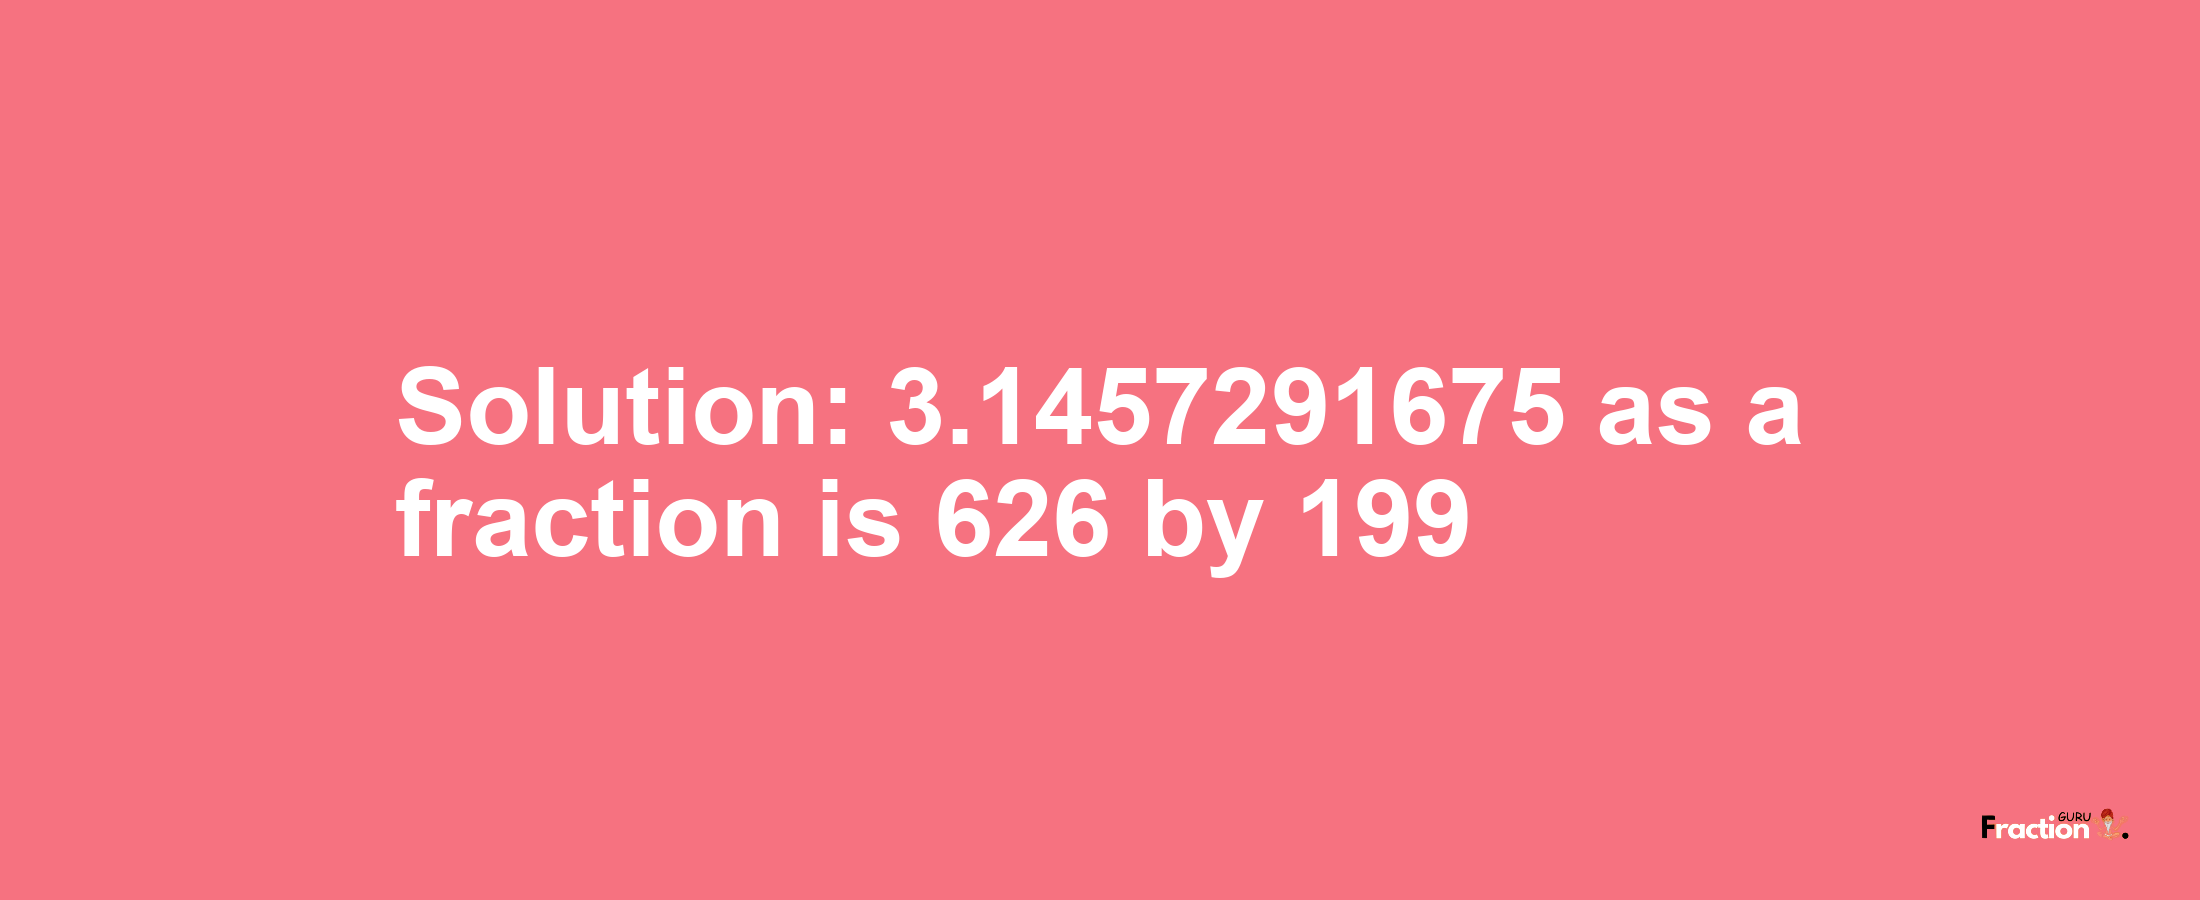 Solution:3.1457291675 as a fraction is 626/199